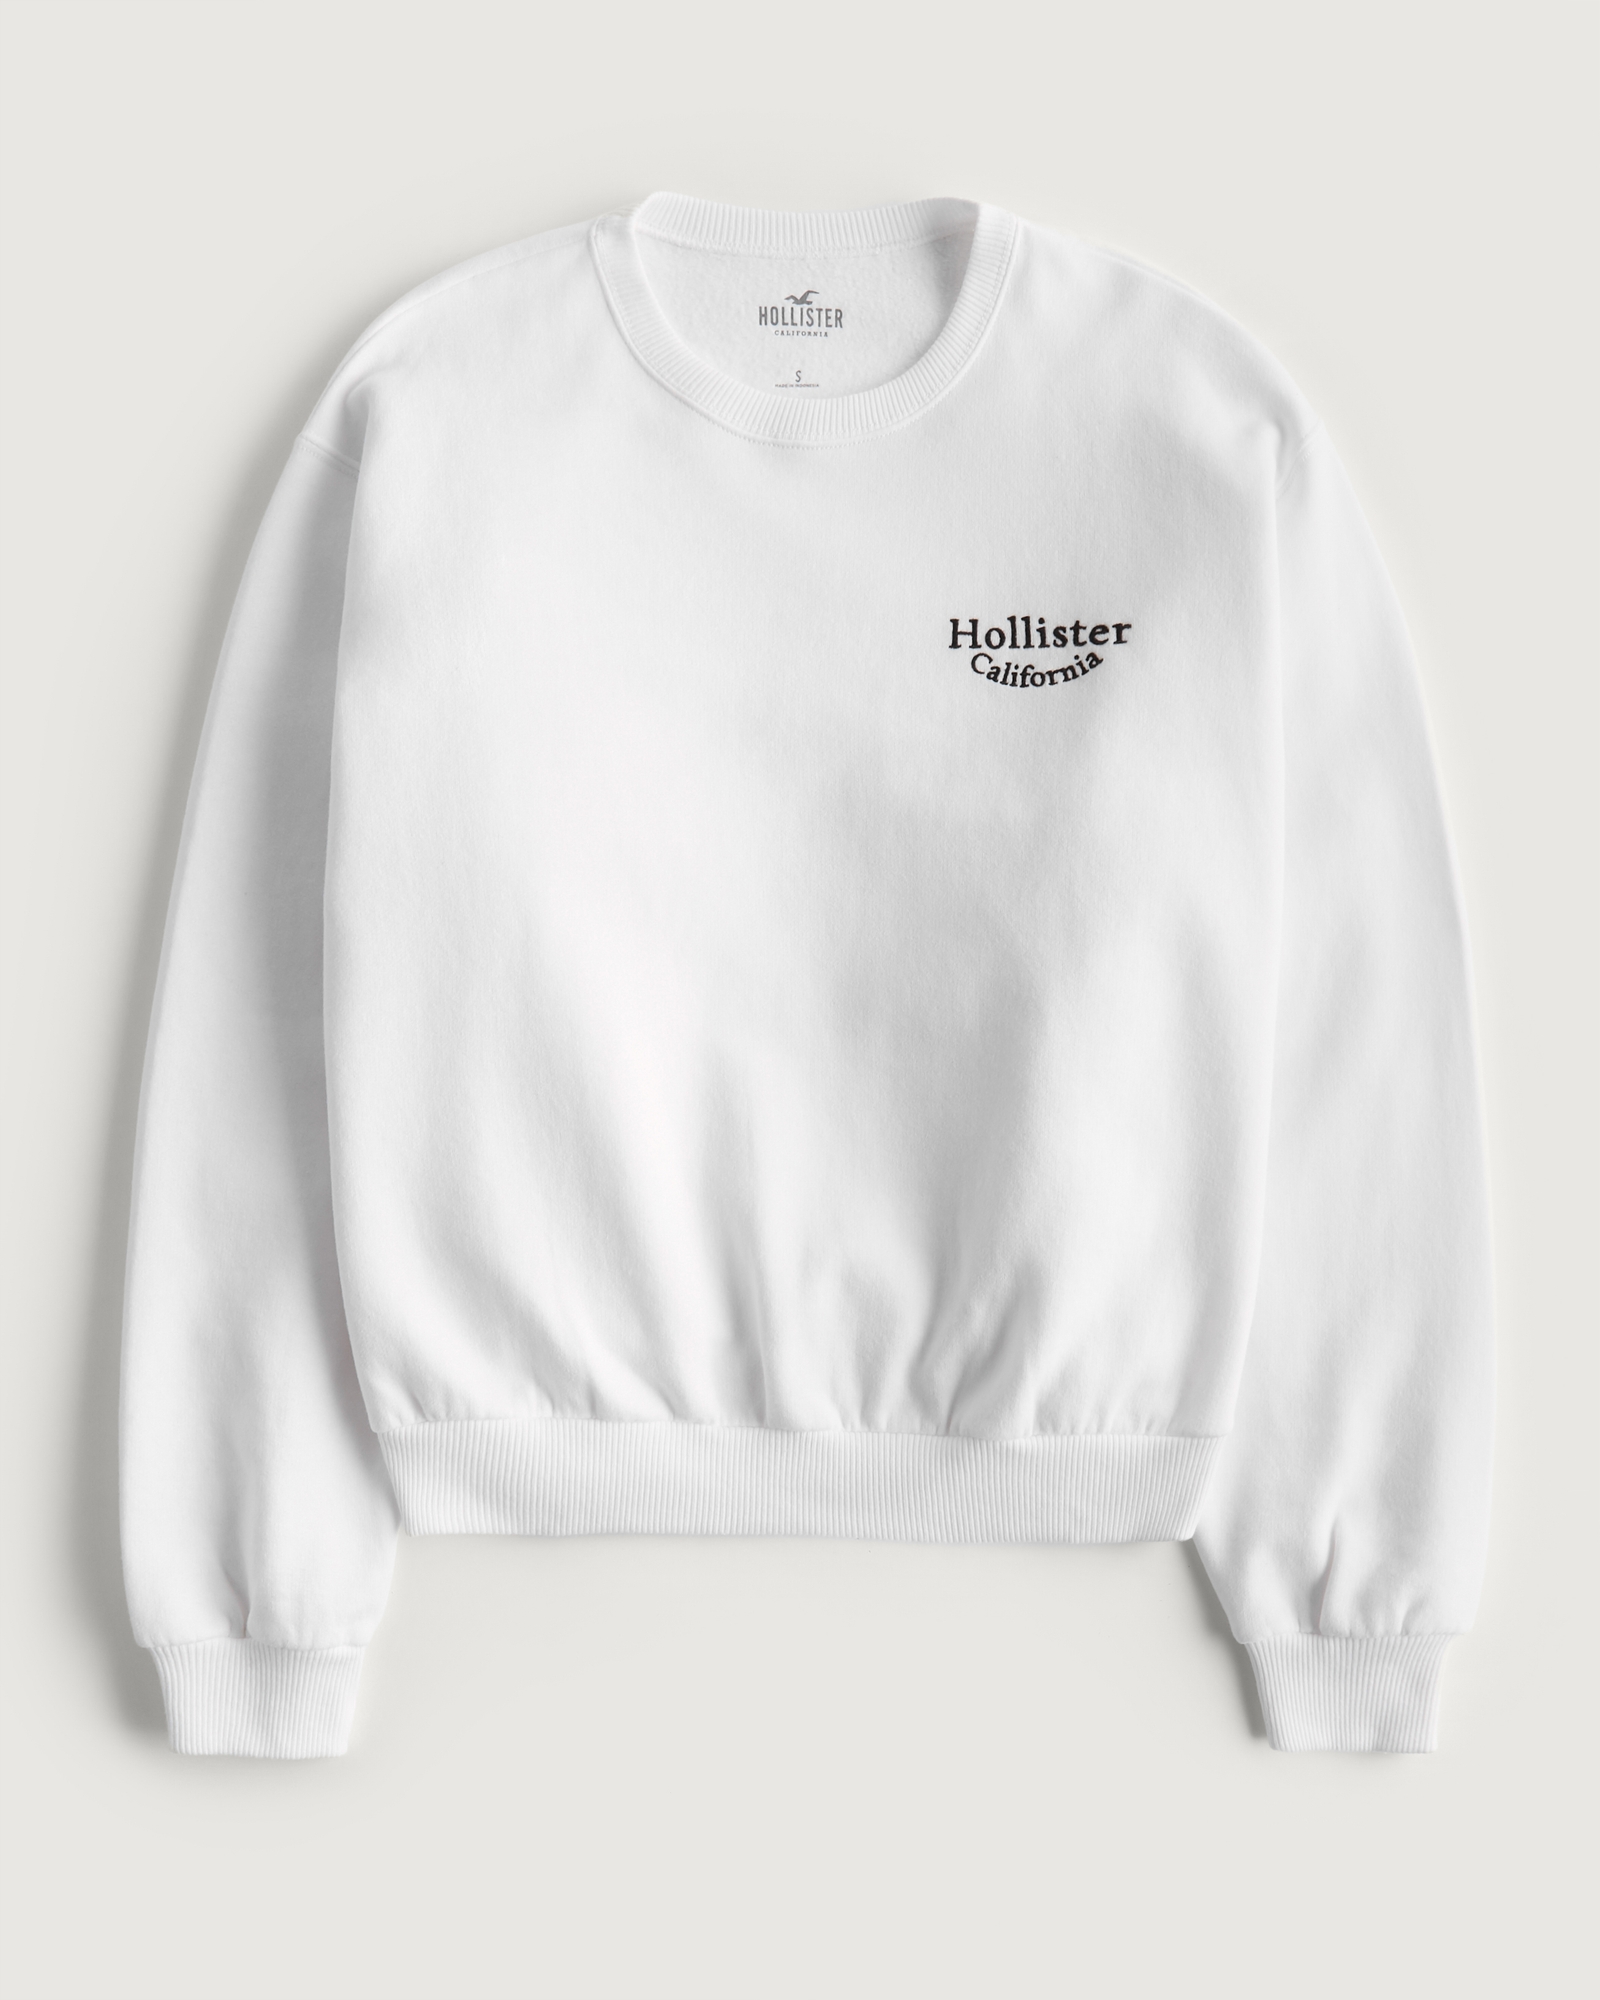 Down to Nothing Stacked Logo Crewneck